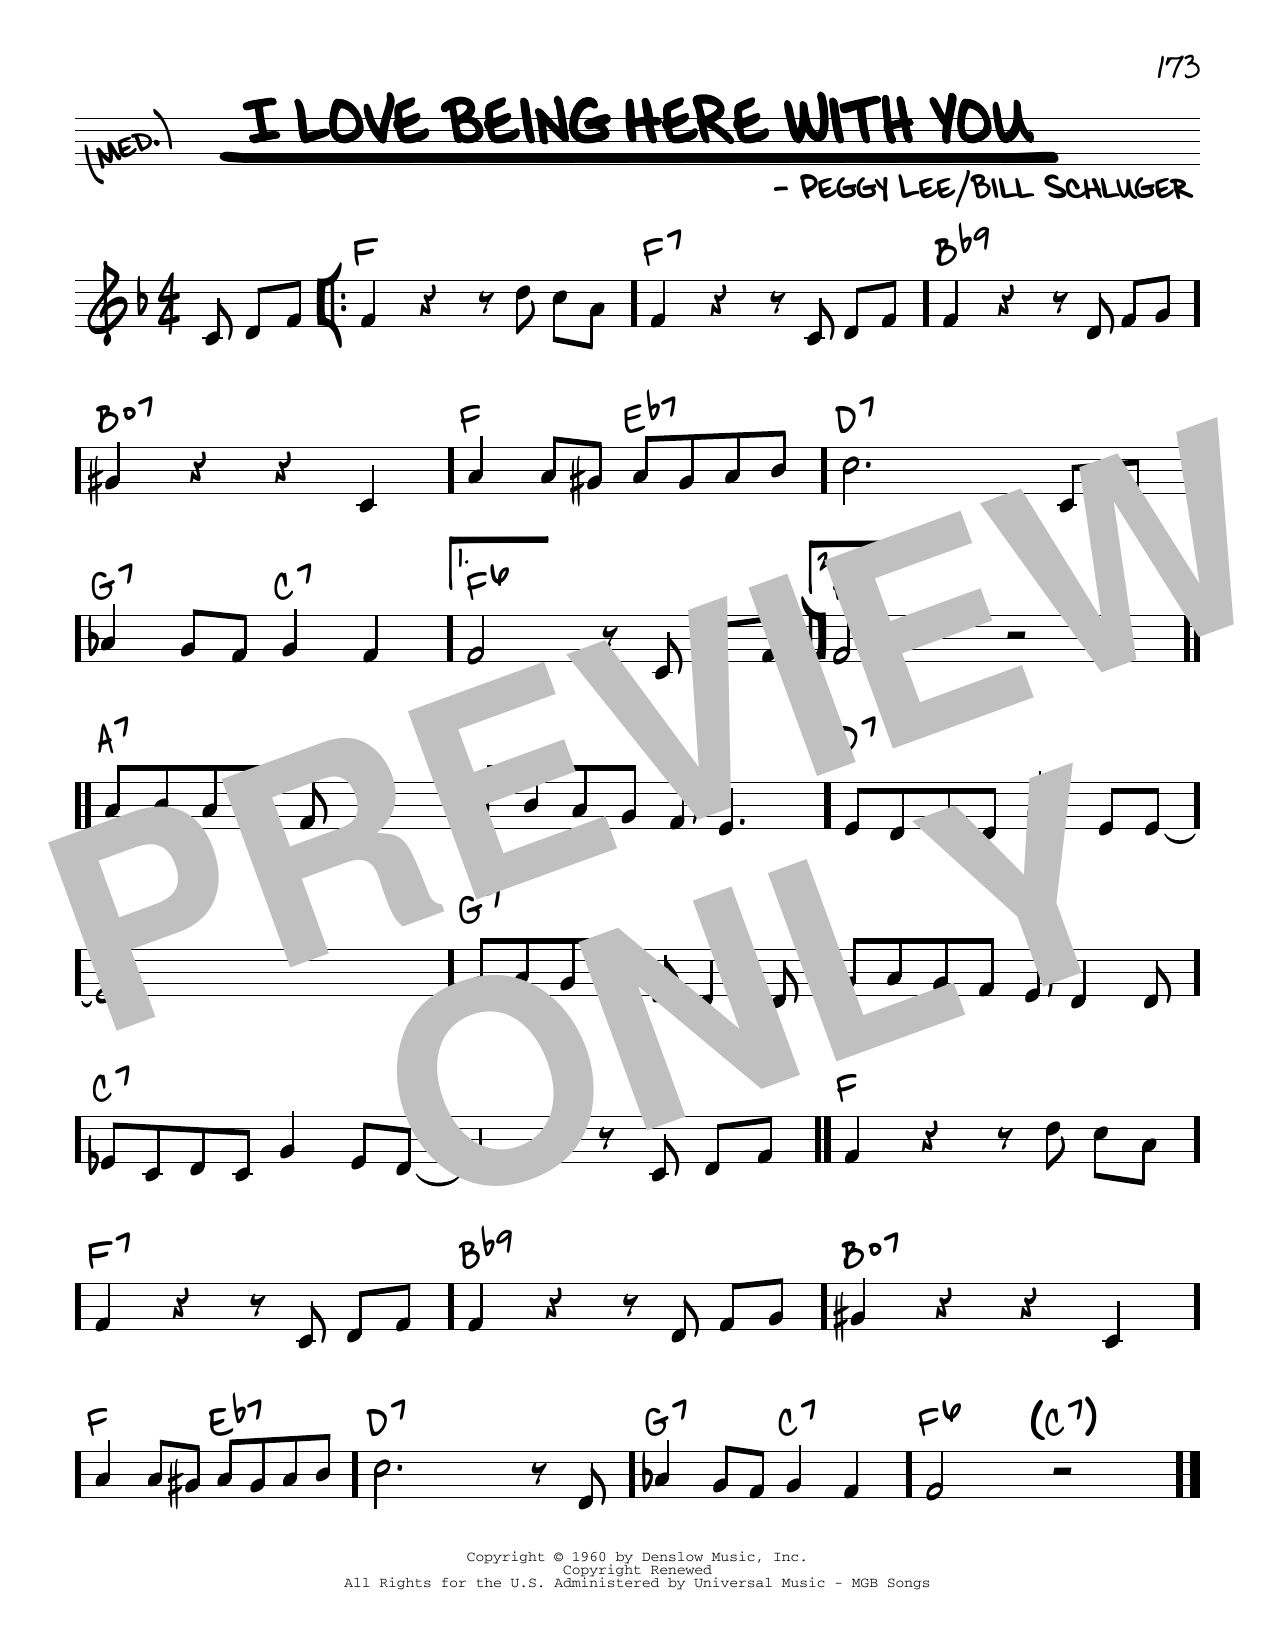 Download Peggy Lee I Love Being Here With You Sheet Music